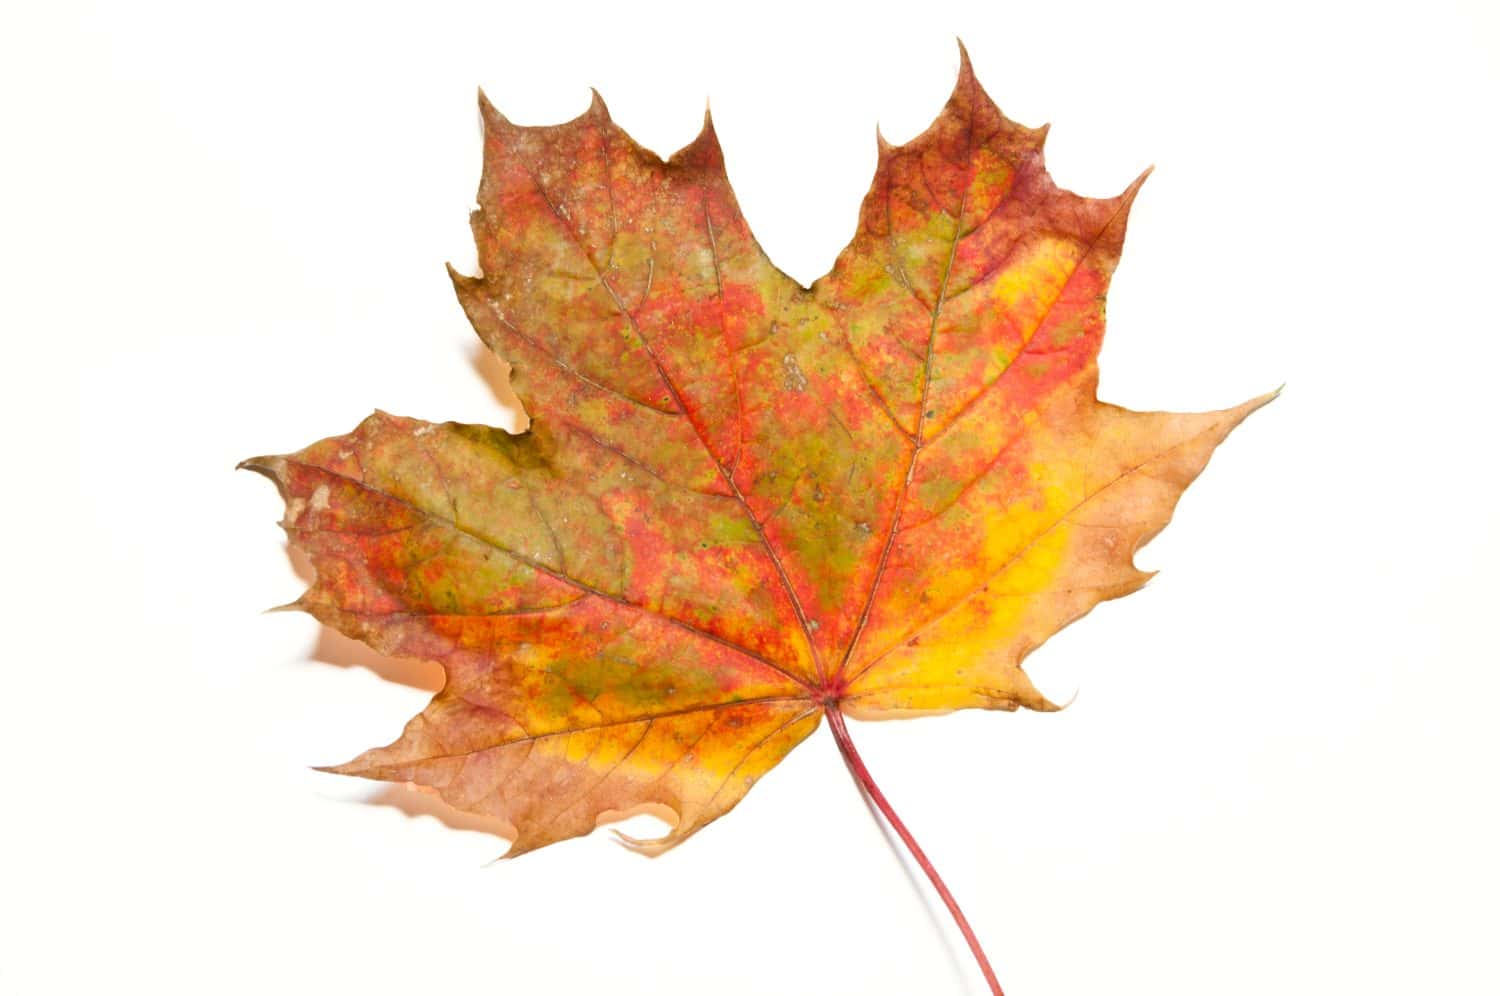 Single yellow and red autumn leaf on white, isolating background